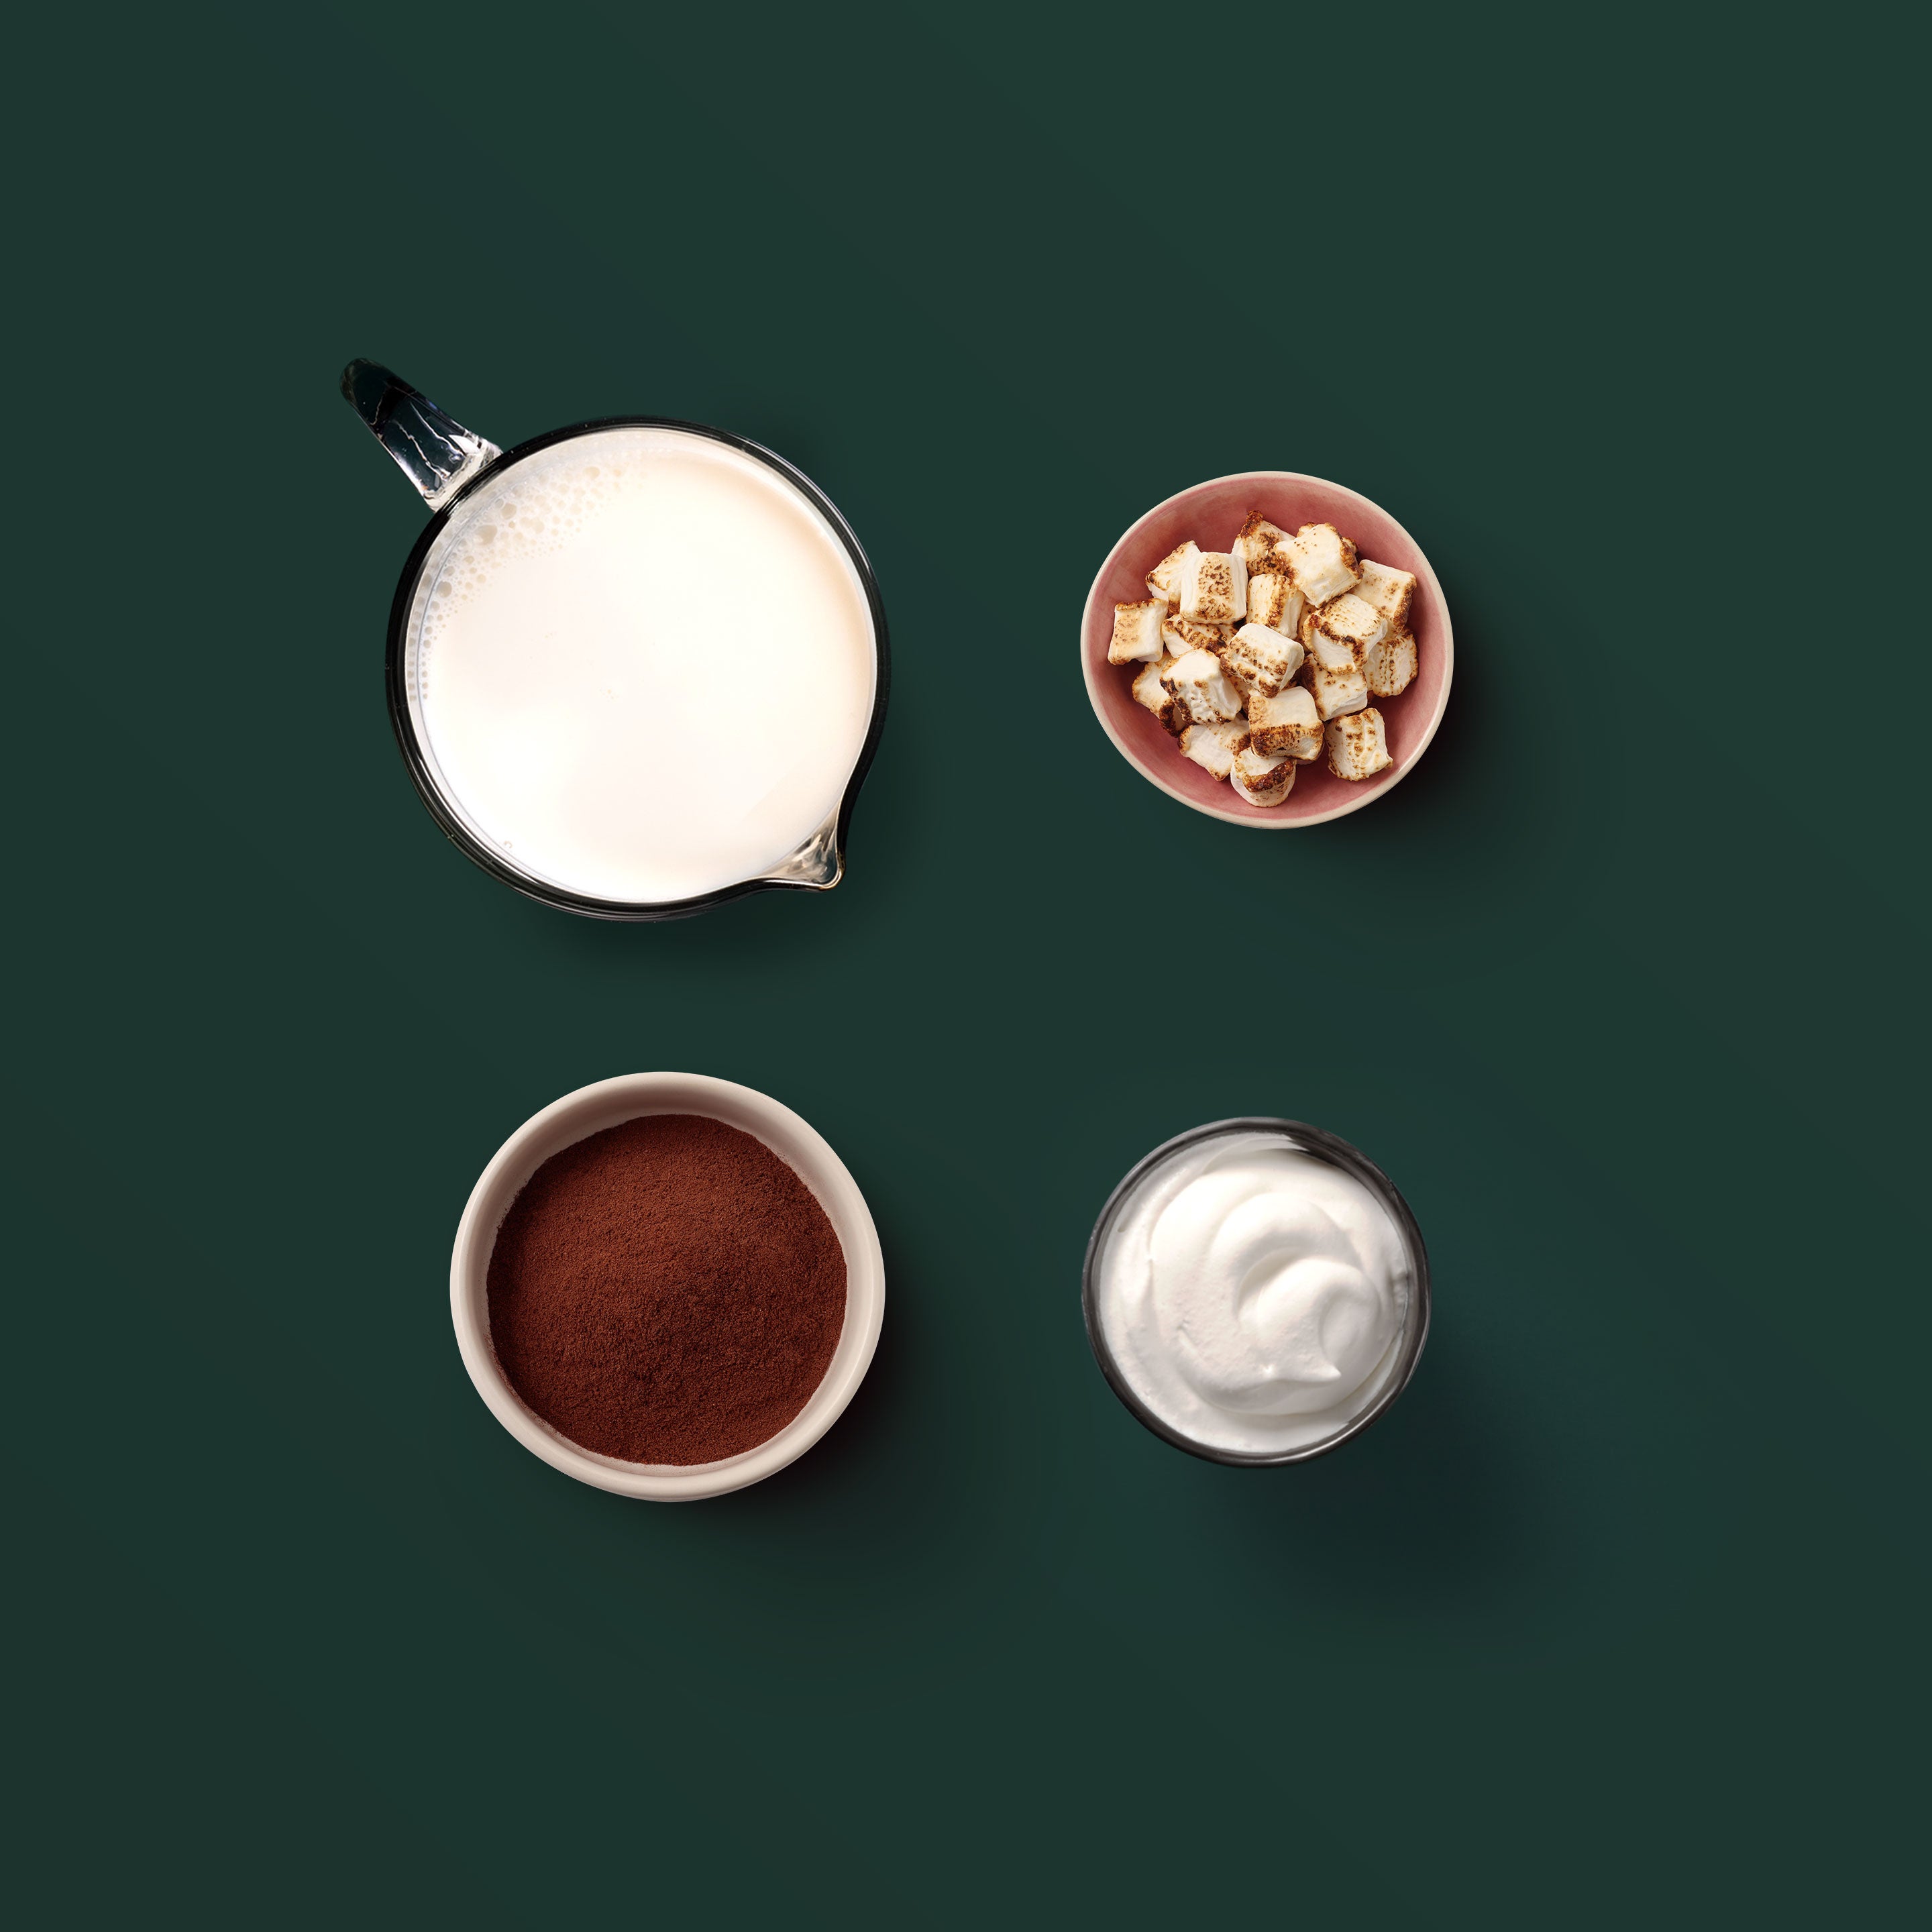 Toasted Marshmallow Hot Chocolate ingredients